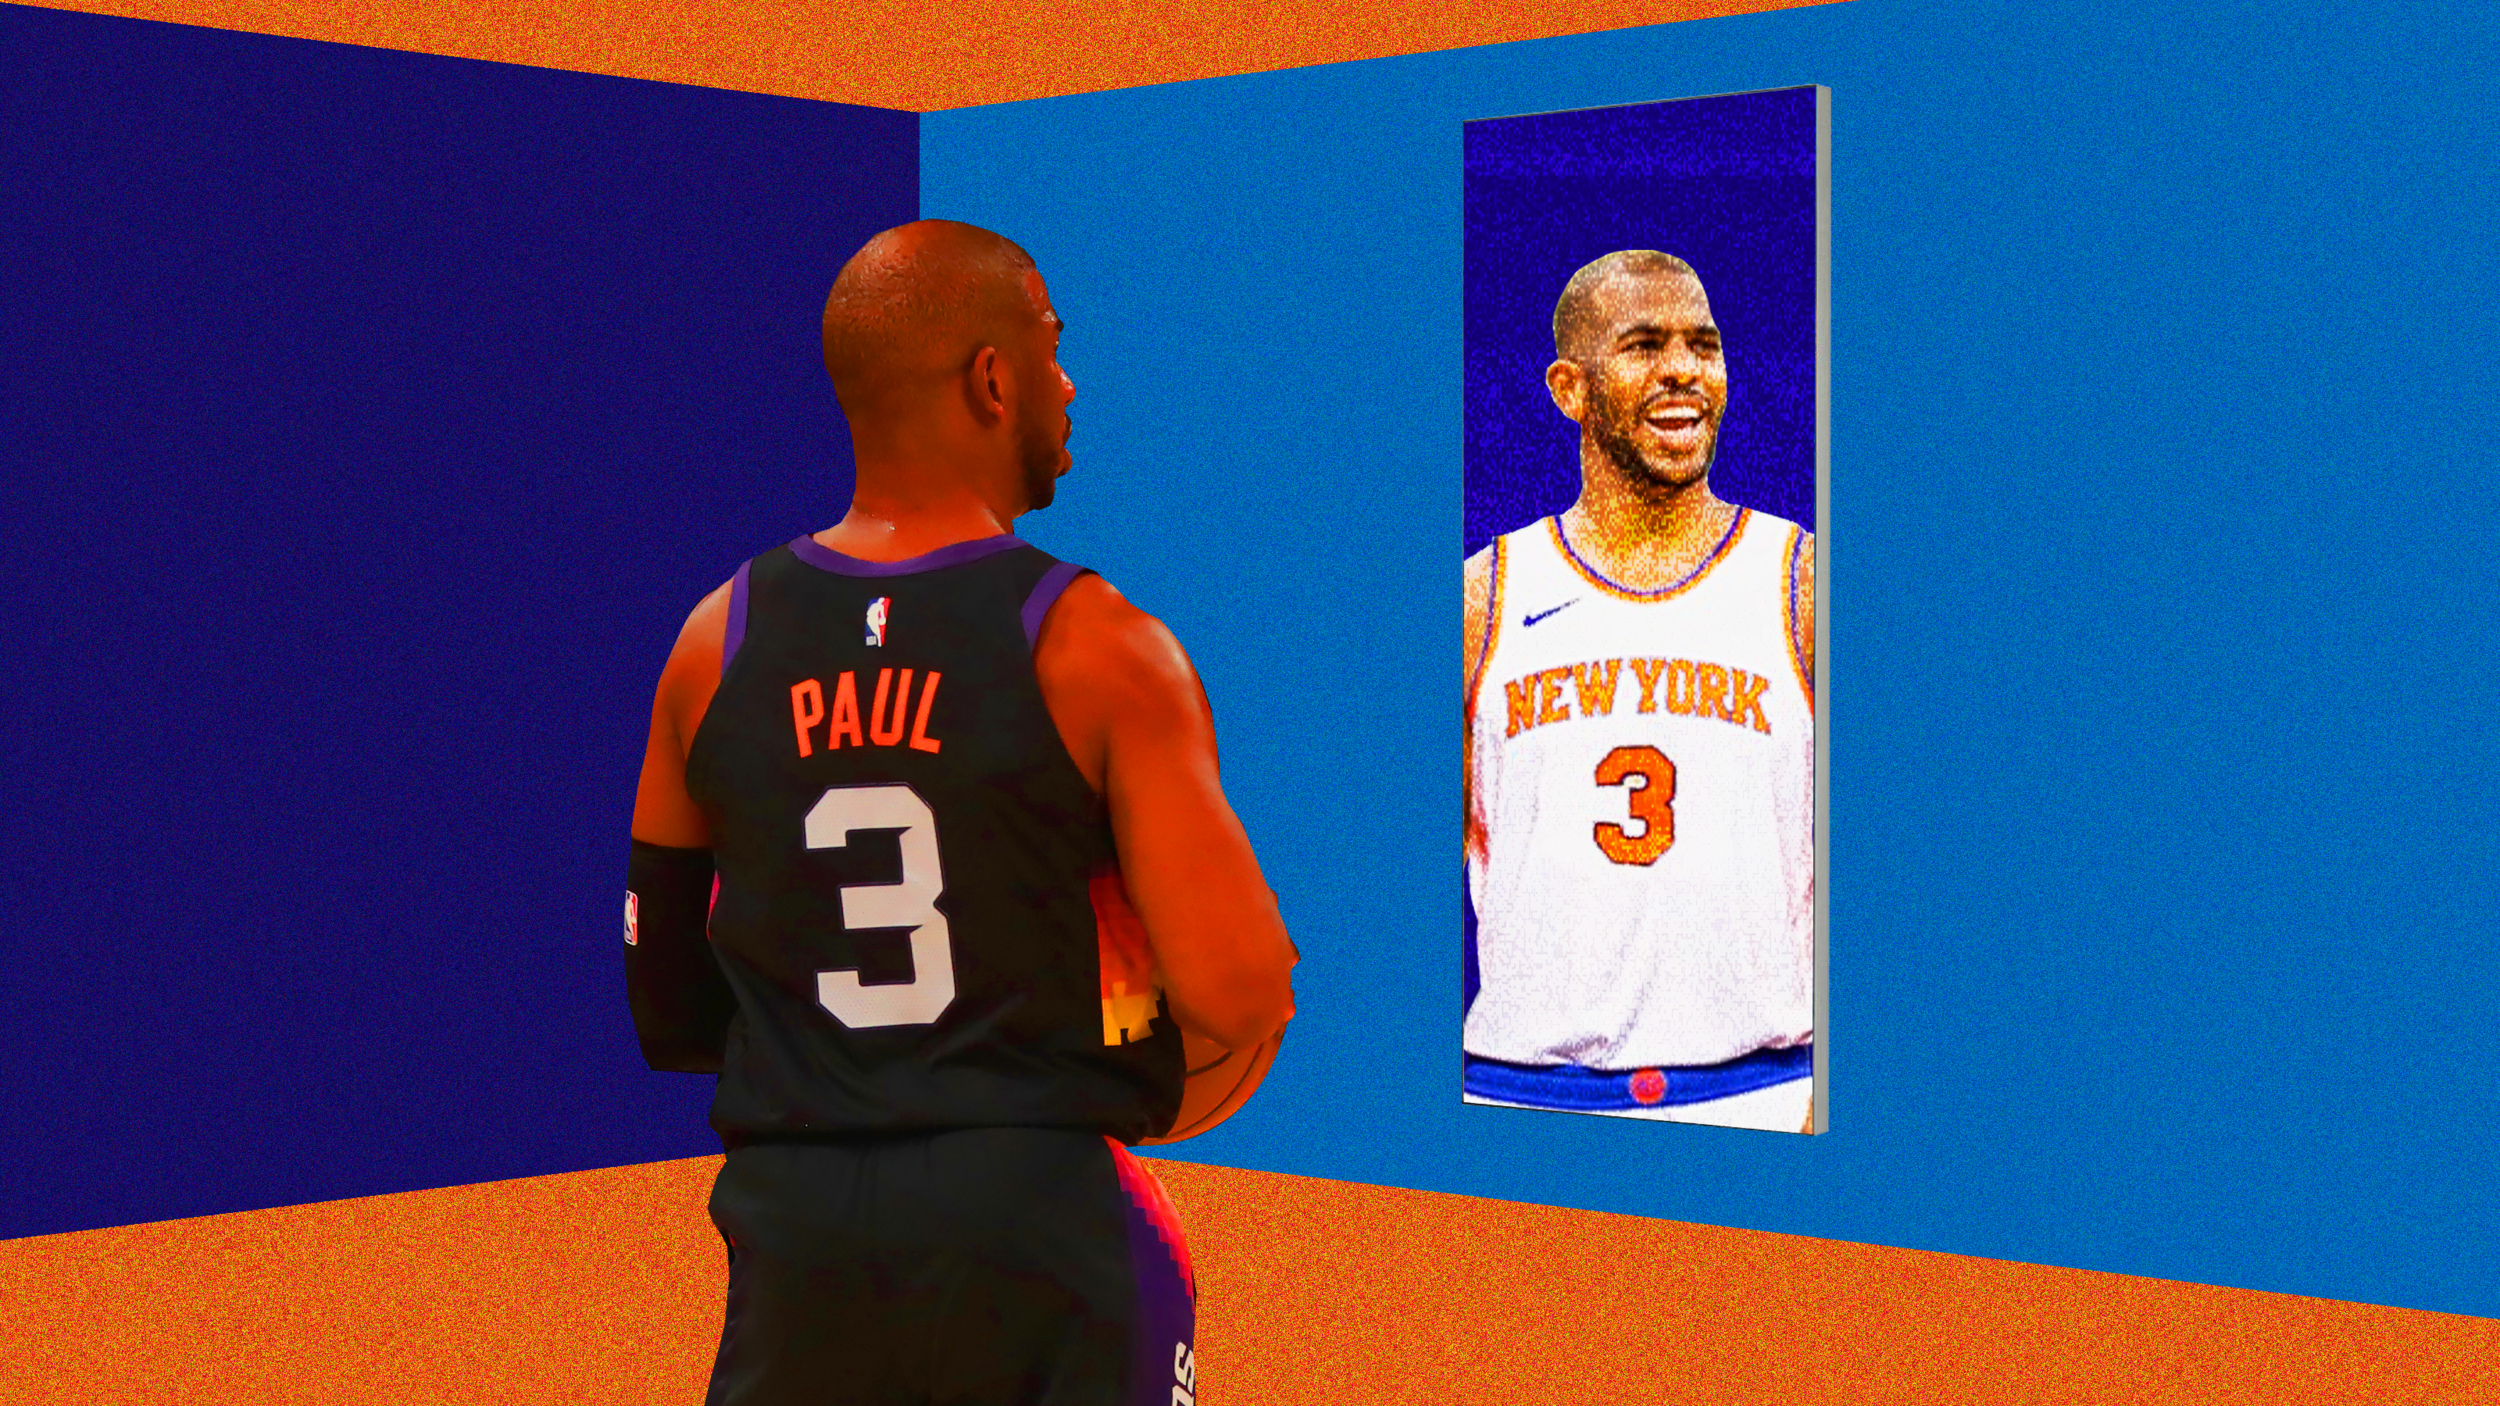 The New York-Phoenix Parallel: How the Knicks and Suns took